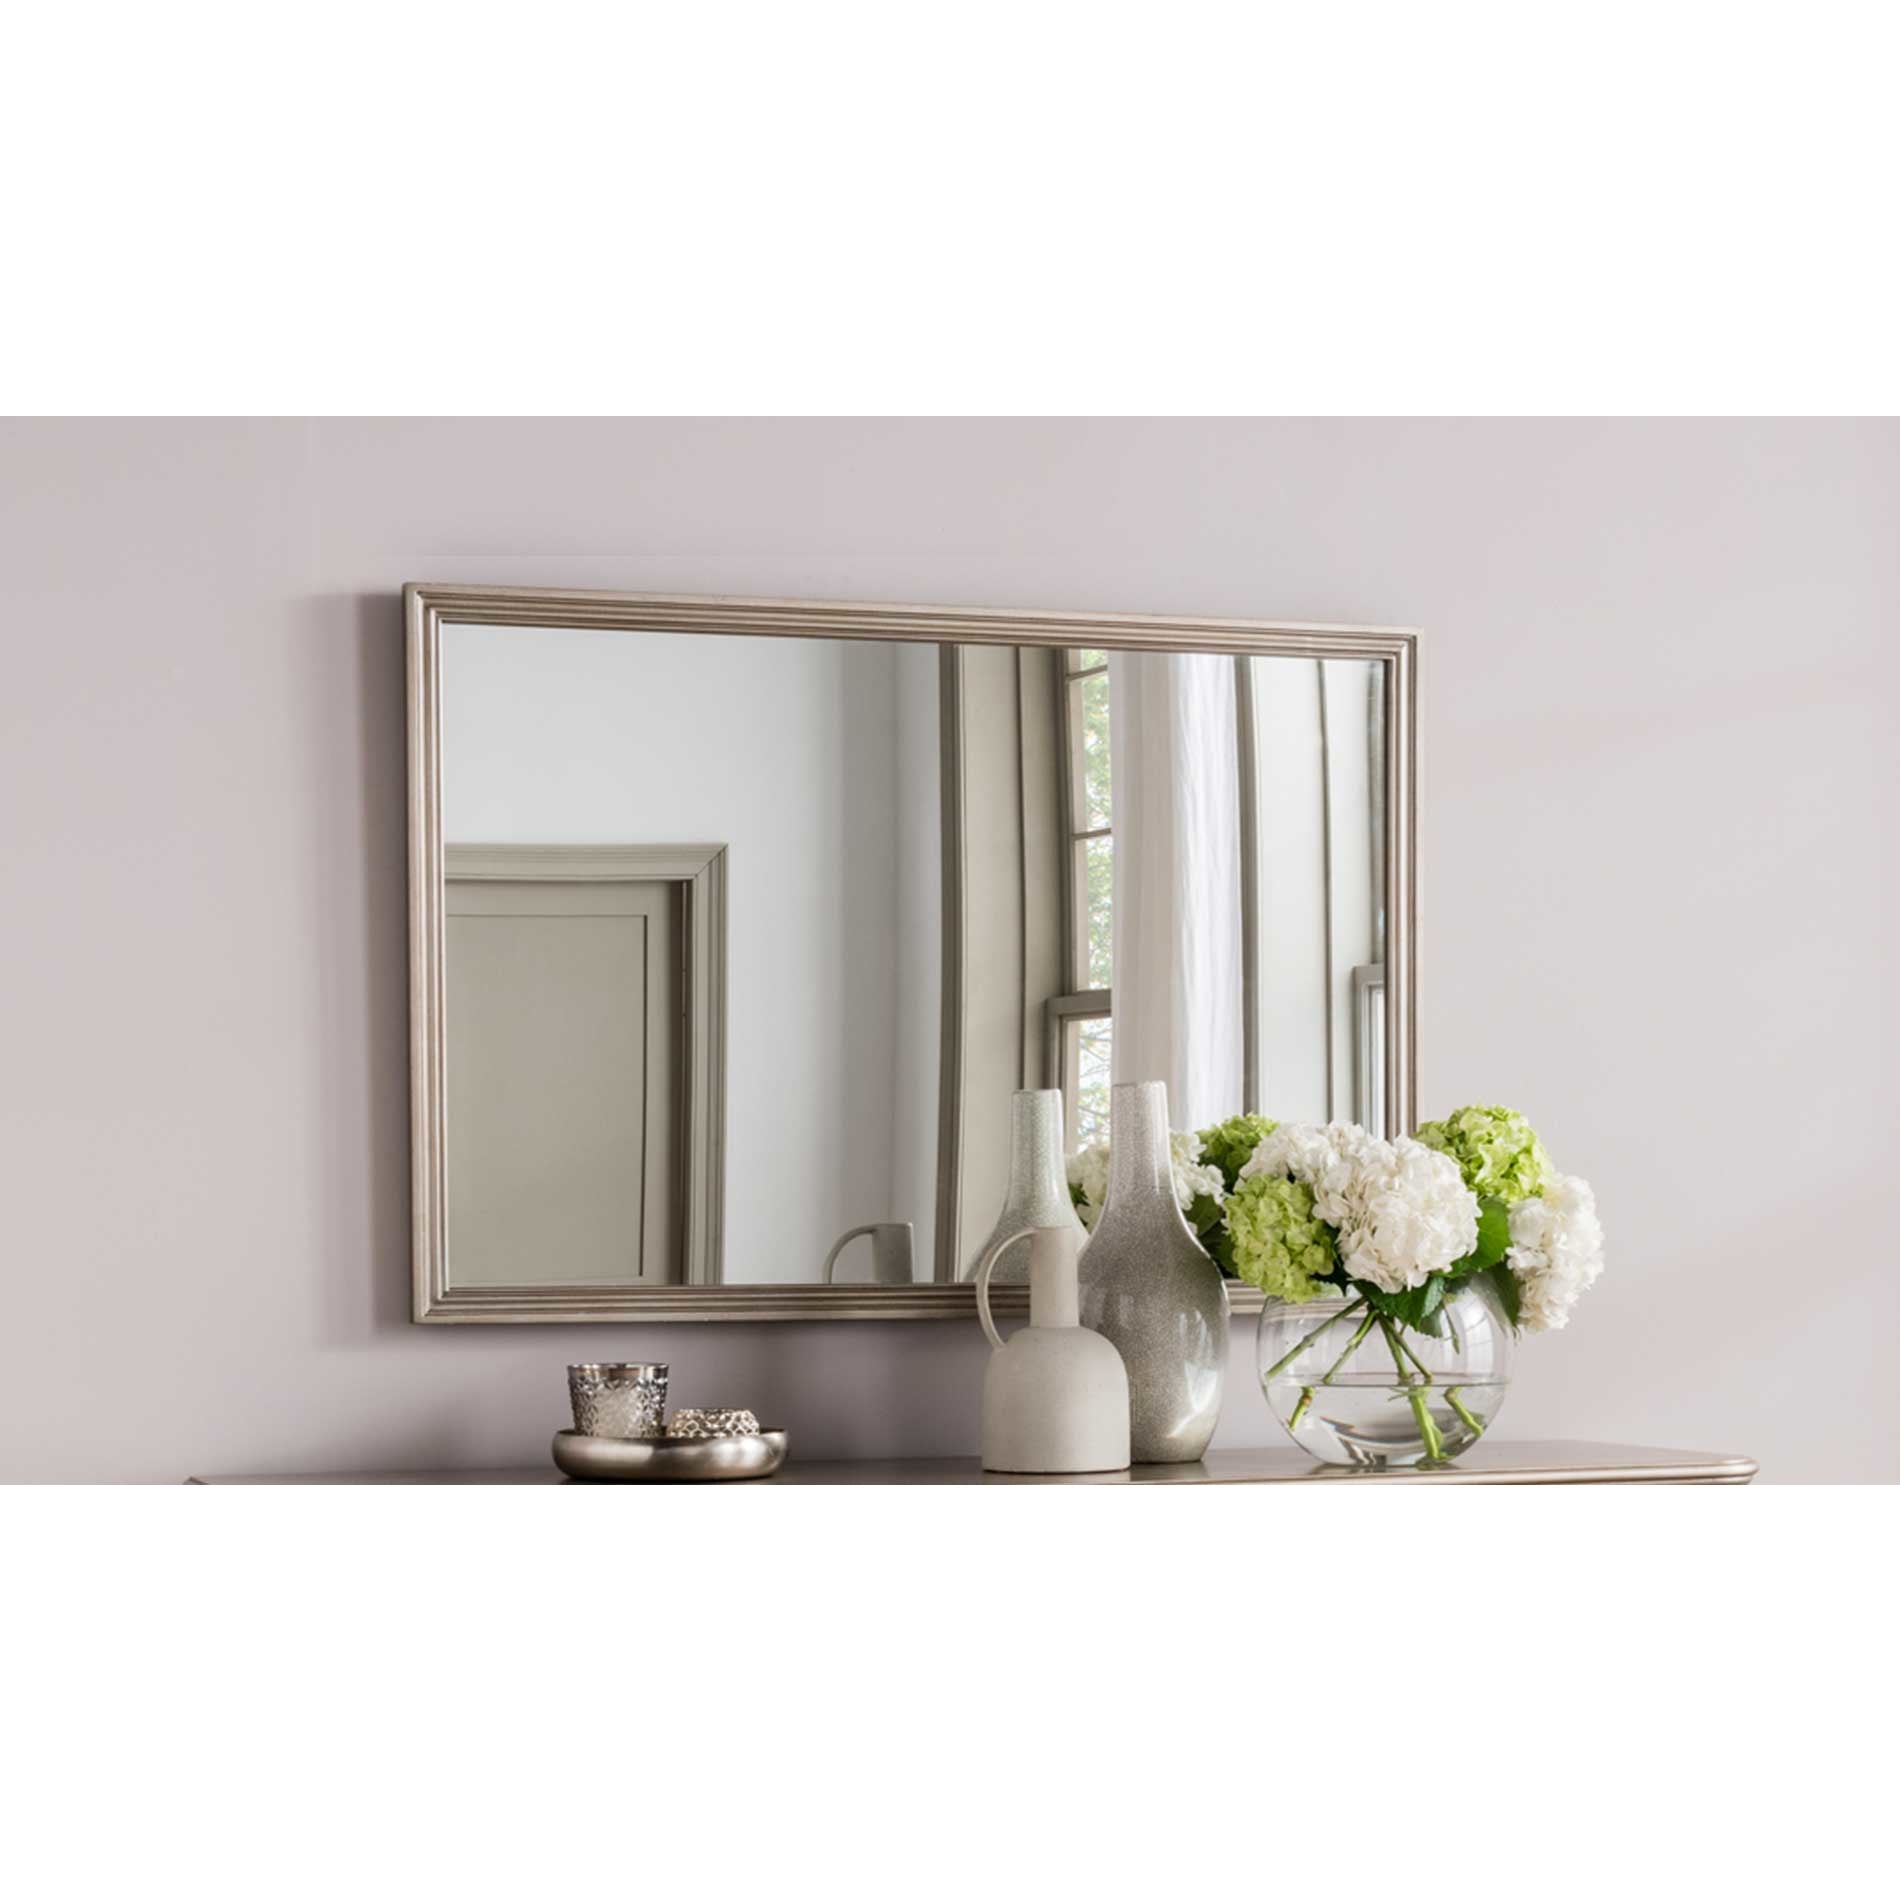 Jessica Wall Mirror from Upstairs Downstairs Furniture in Lisburn, Monaghan and Enniskillen